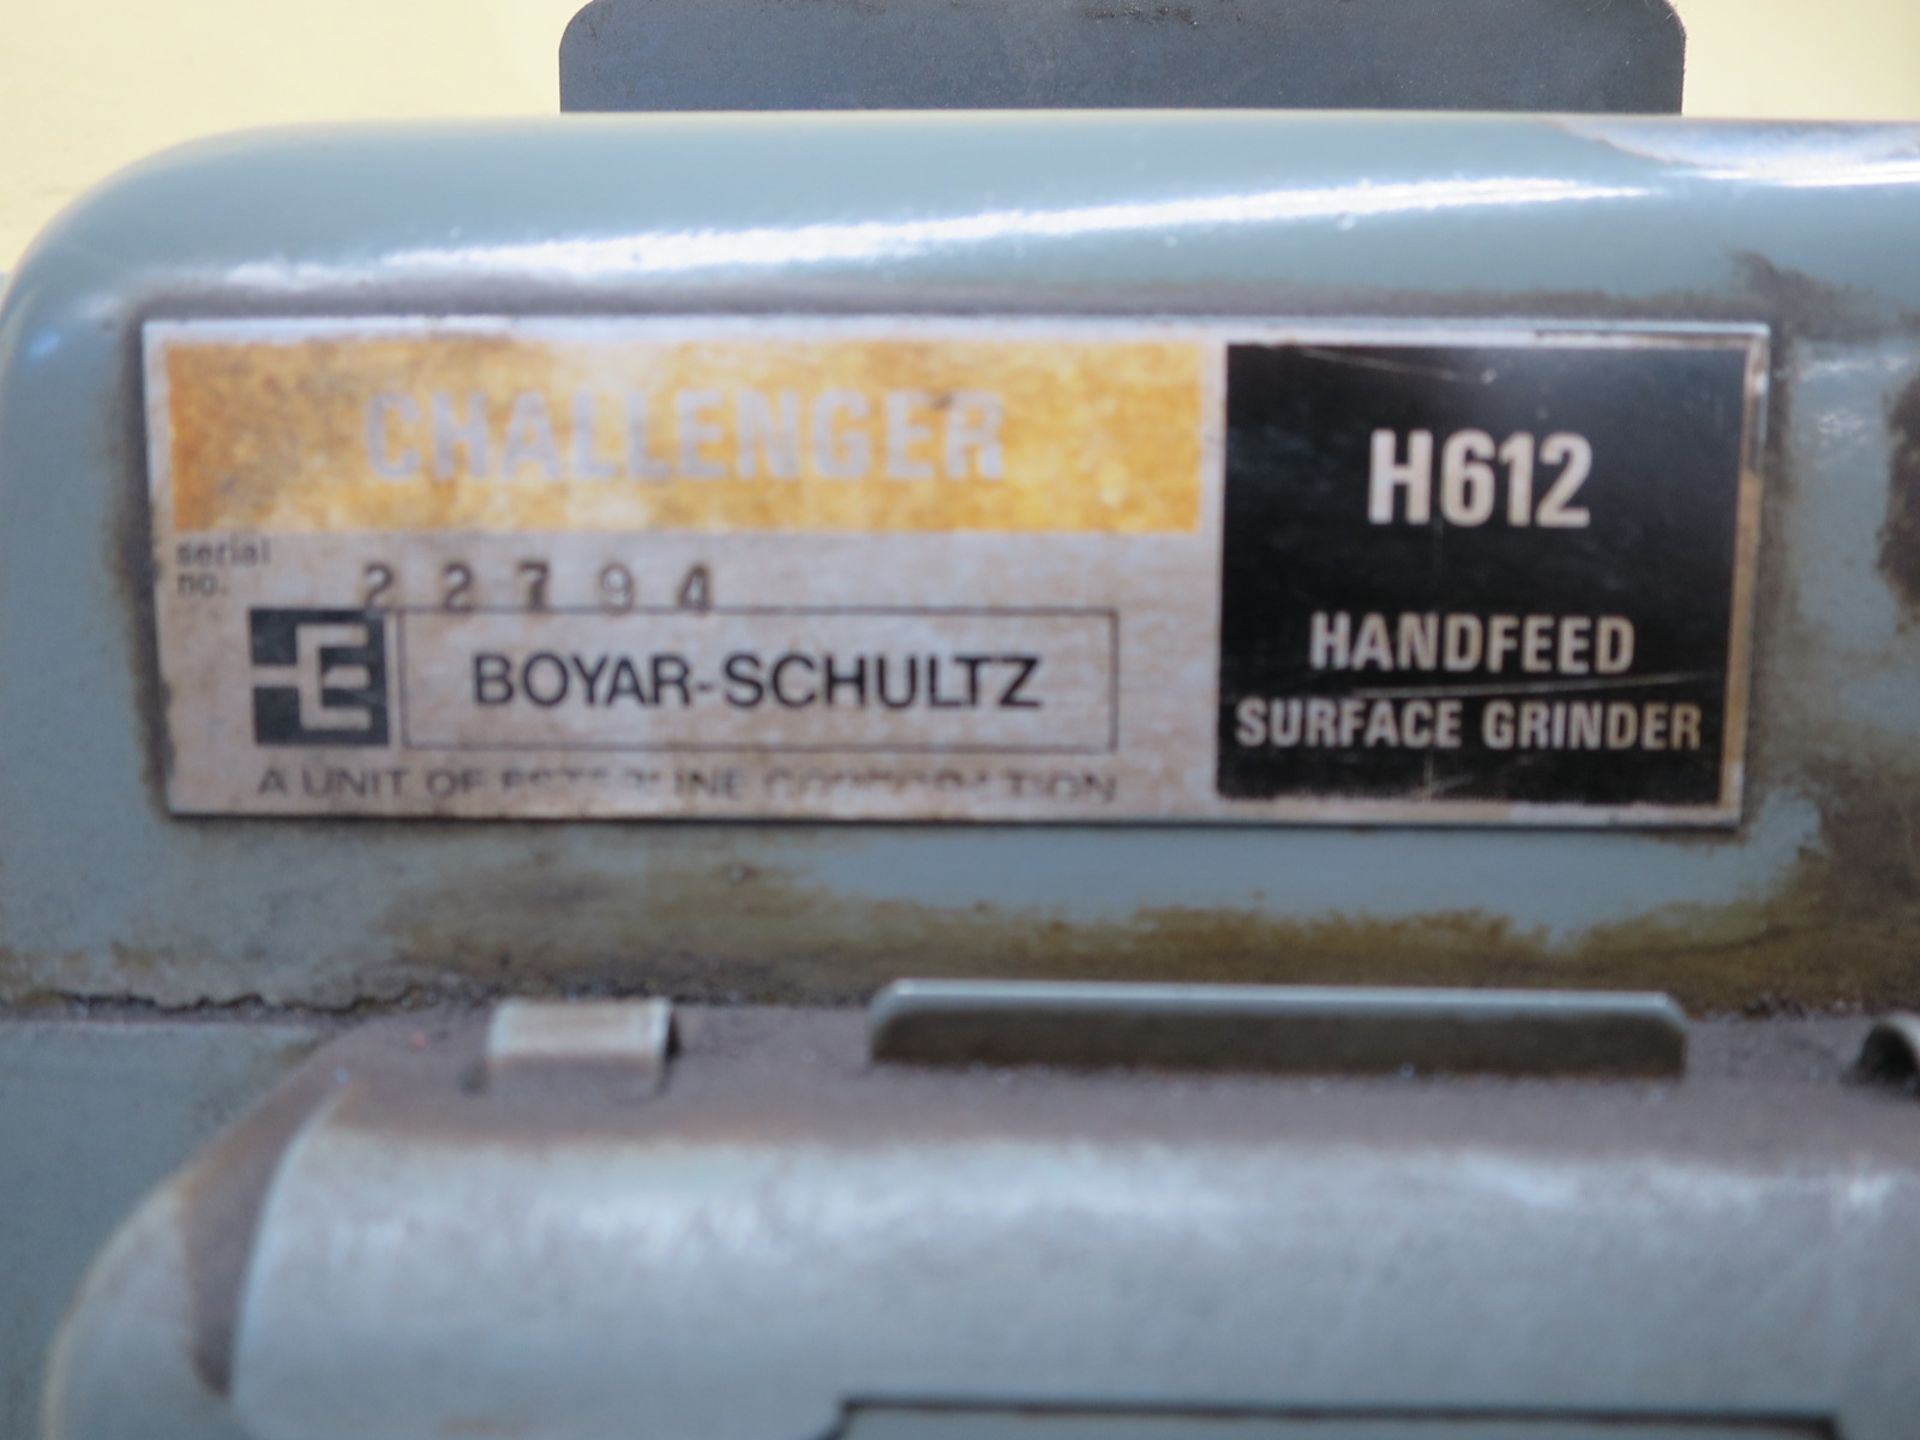 Boyar Schultz H612 Surface Grinder, Sn 22794 With Walker Ceramax Magnetic Chuck Table Size: - Image 2 of 3